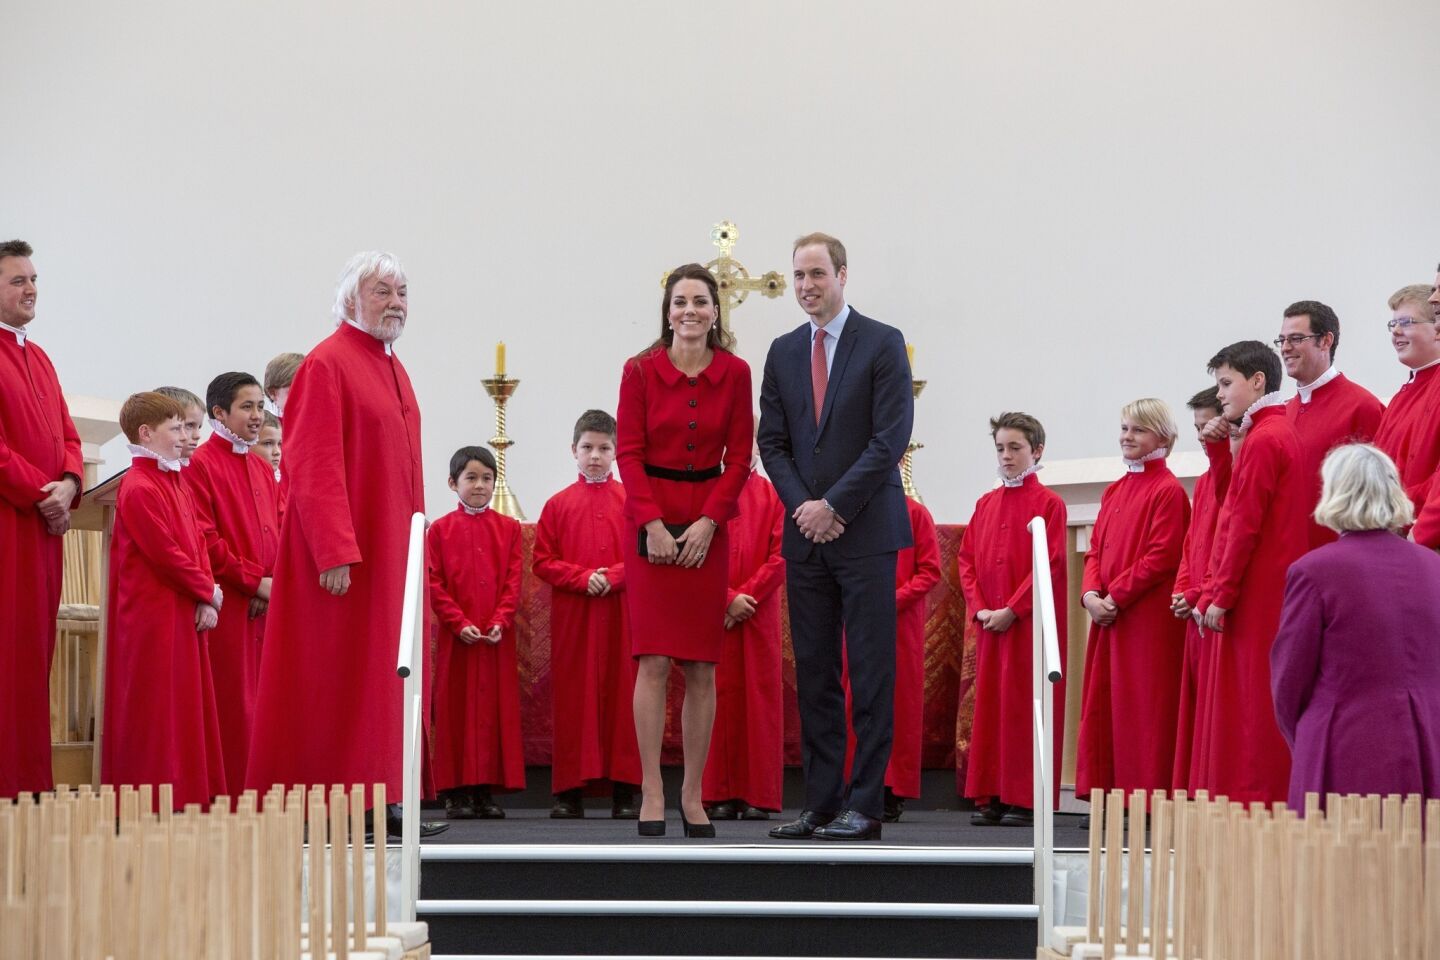 The duke and duchess meet the public in Latimer Square Gardens in Christchurch, New Zealand.